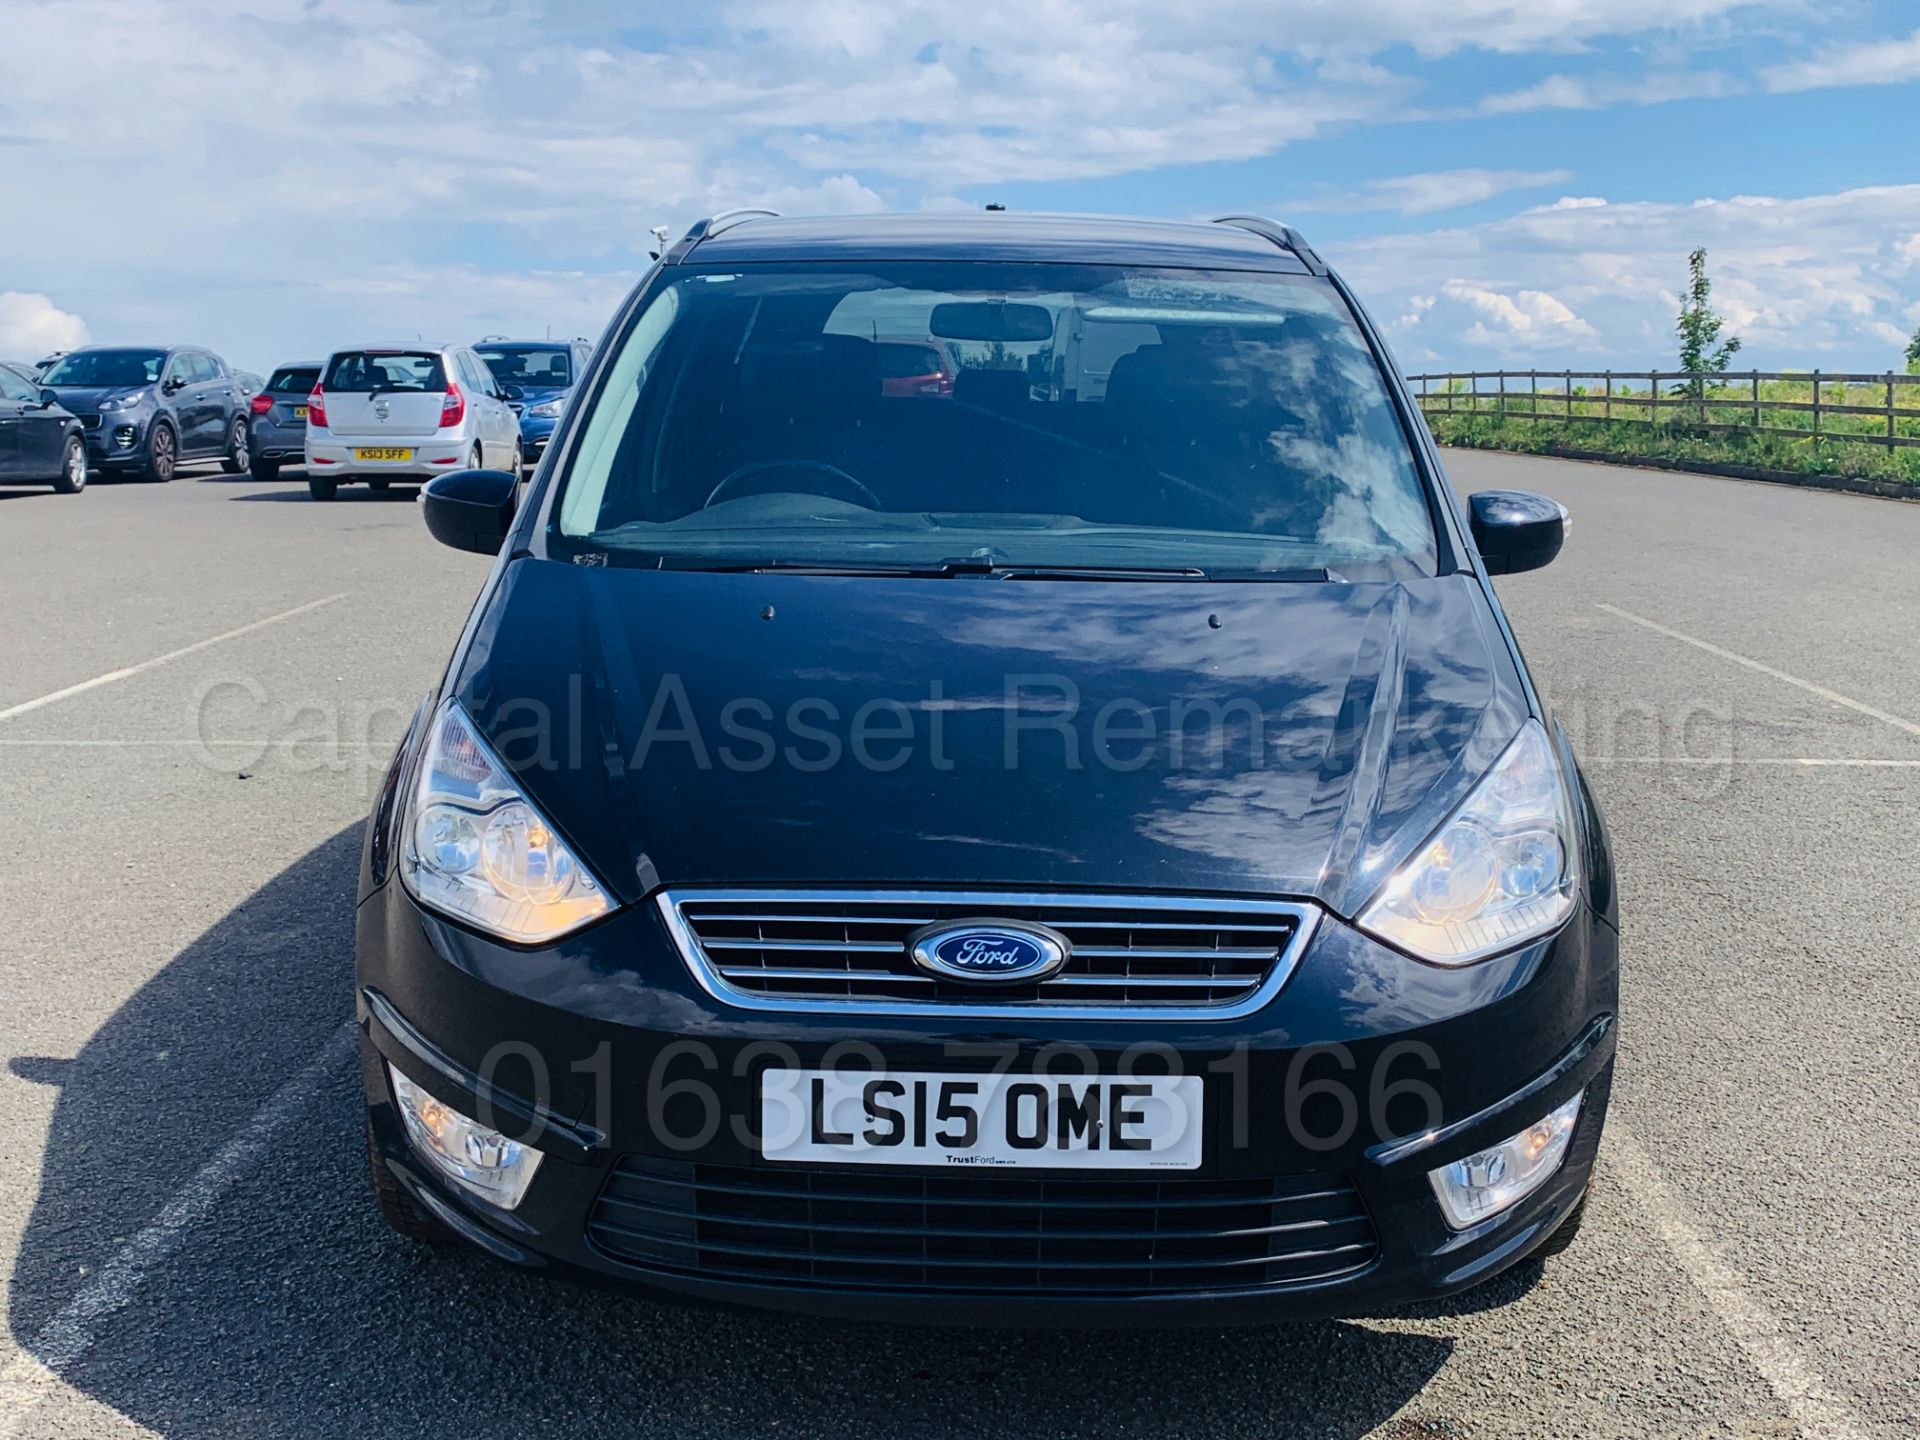 (On Sale) FORD GALAXY *ZETEC* 7 SEATER MPV (2015) '2.0 TDCI - 140 BHP - POWER SHIFT' (1 OWNER) - Image 12 of 37